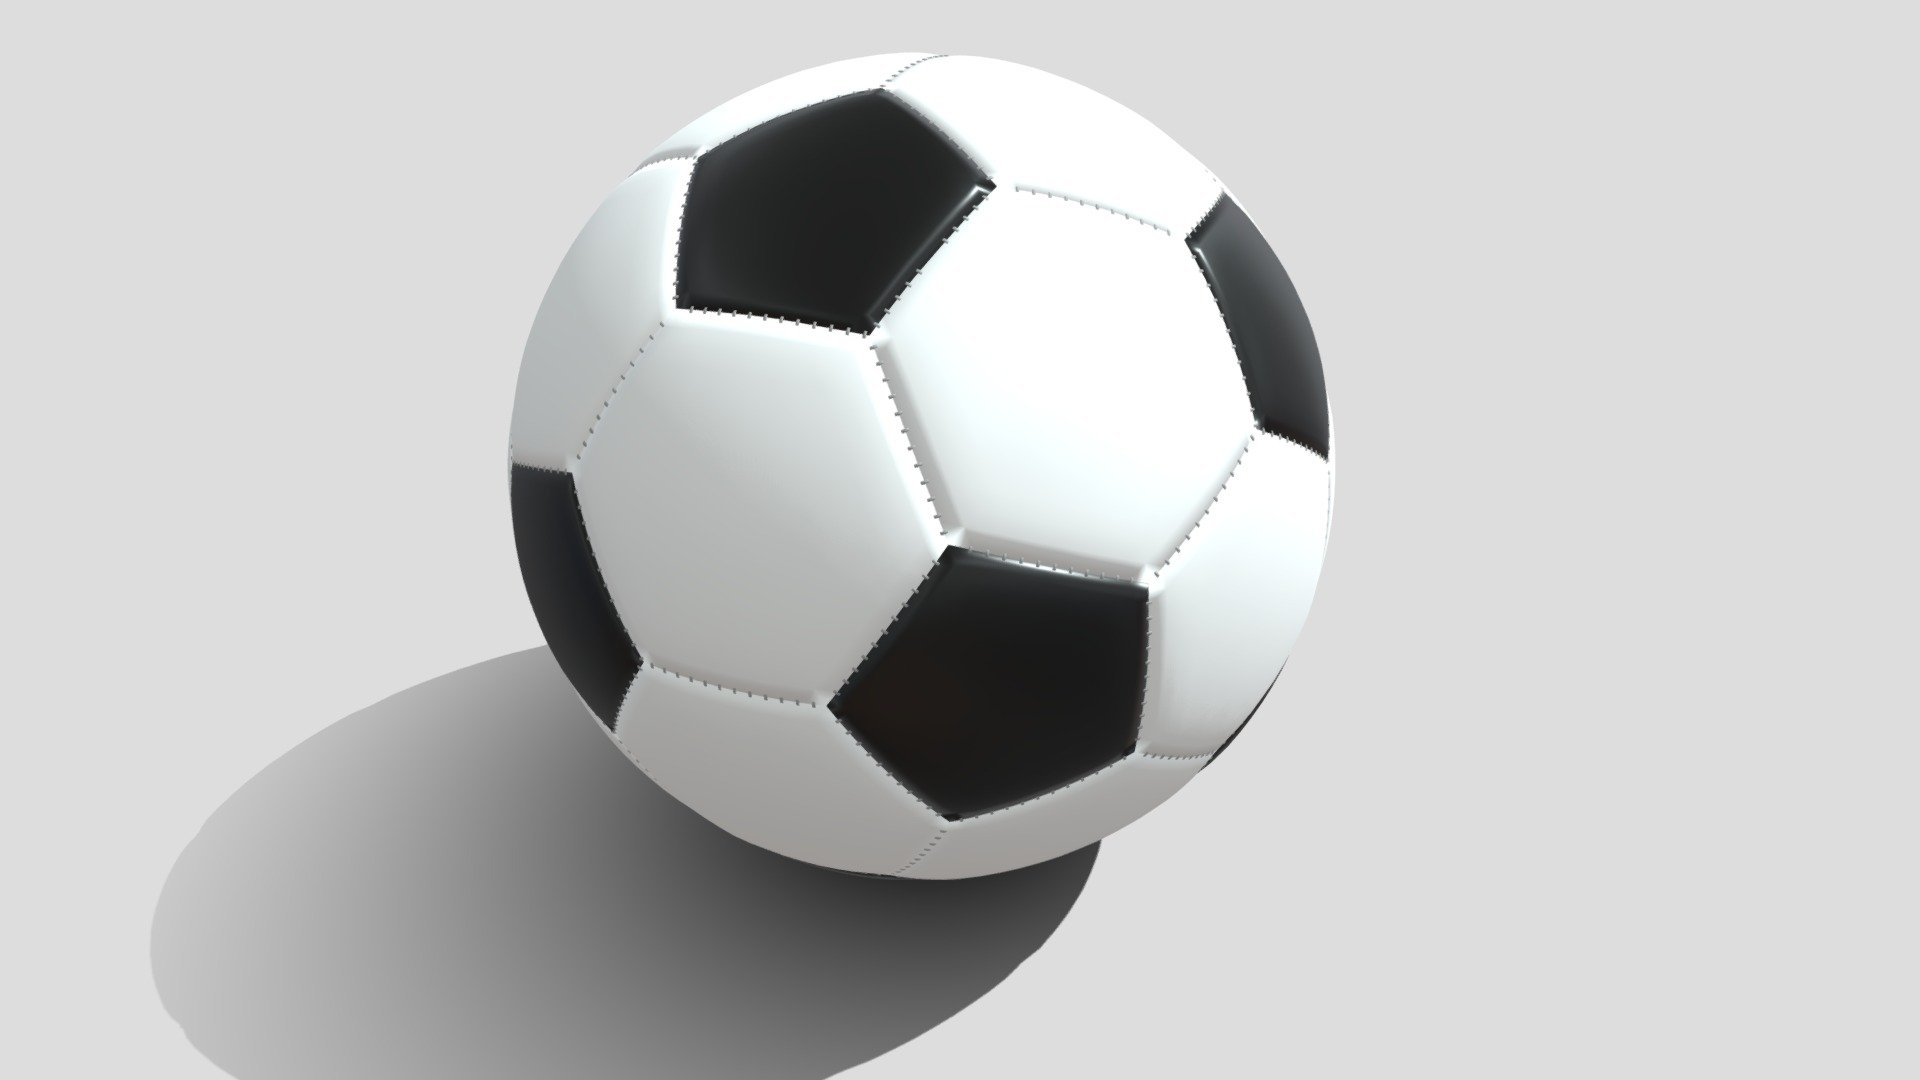 Model made using Blender 2.82, it works with Cycles and Eevee render. You can use it with later Blender versions as well. Here you can find and use any of these formats: .blend; .dxf, .obj; .fbx, .stl and .glb. You have to unzip the SoccerBall zip folder in order to use the files appropriately. Also, you can find a short video in mp4 file format. All necessary files are included.
Note: You have to choose the “Additional file” download option, so you can find and use all the files of this model. Don't forget to UNZIP the file downloaded to can see and use it appropriately 3d model